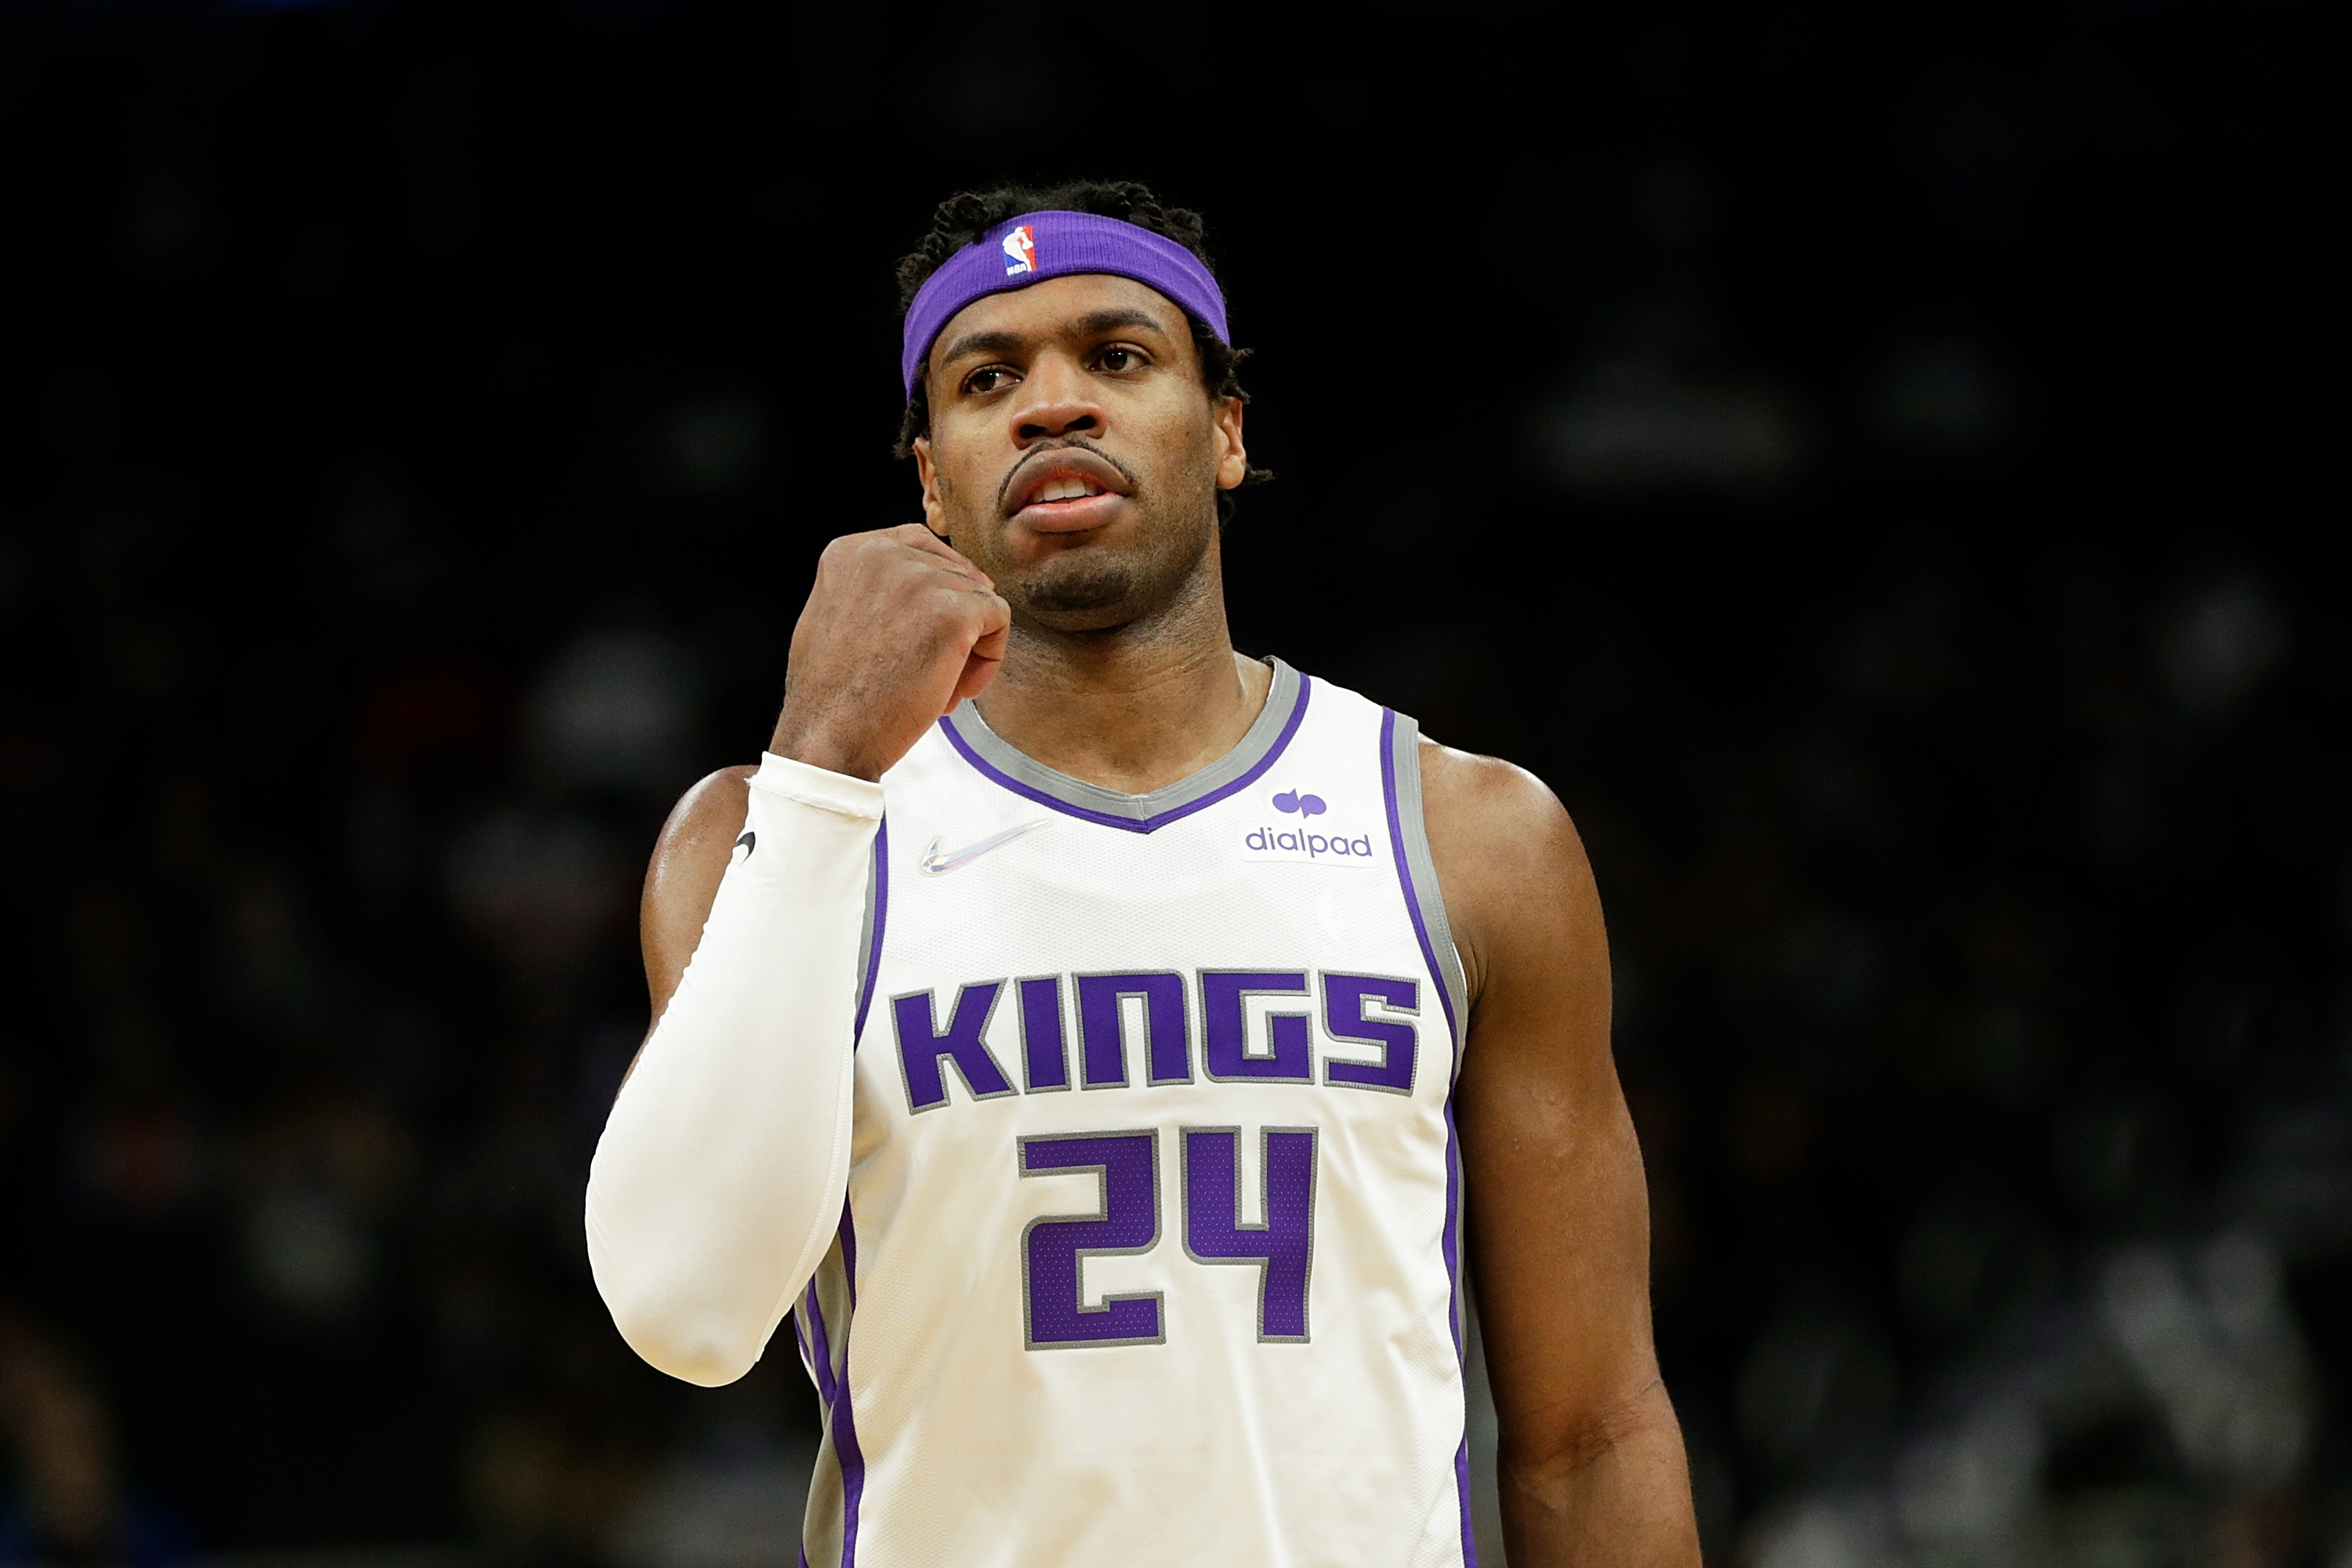 Lakers get an up-close look at Buddy Hield during pre-draft